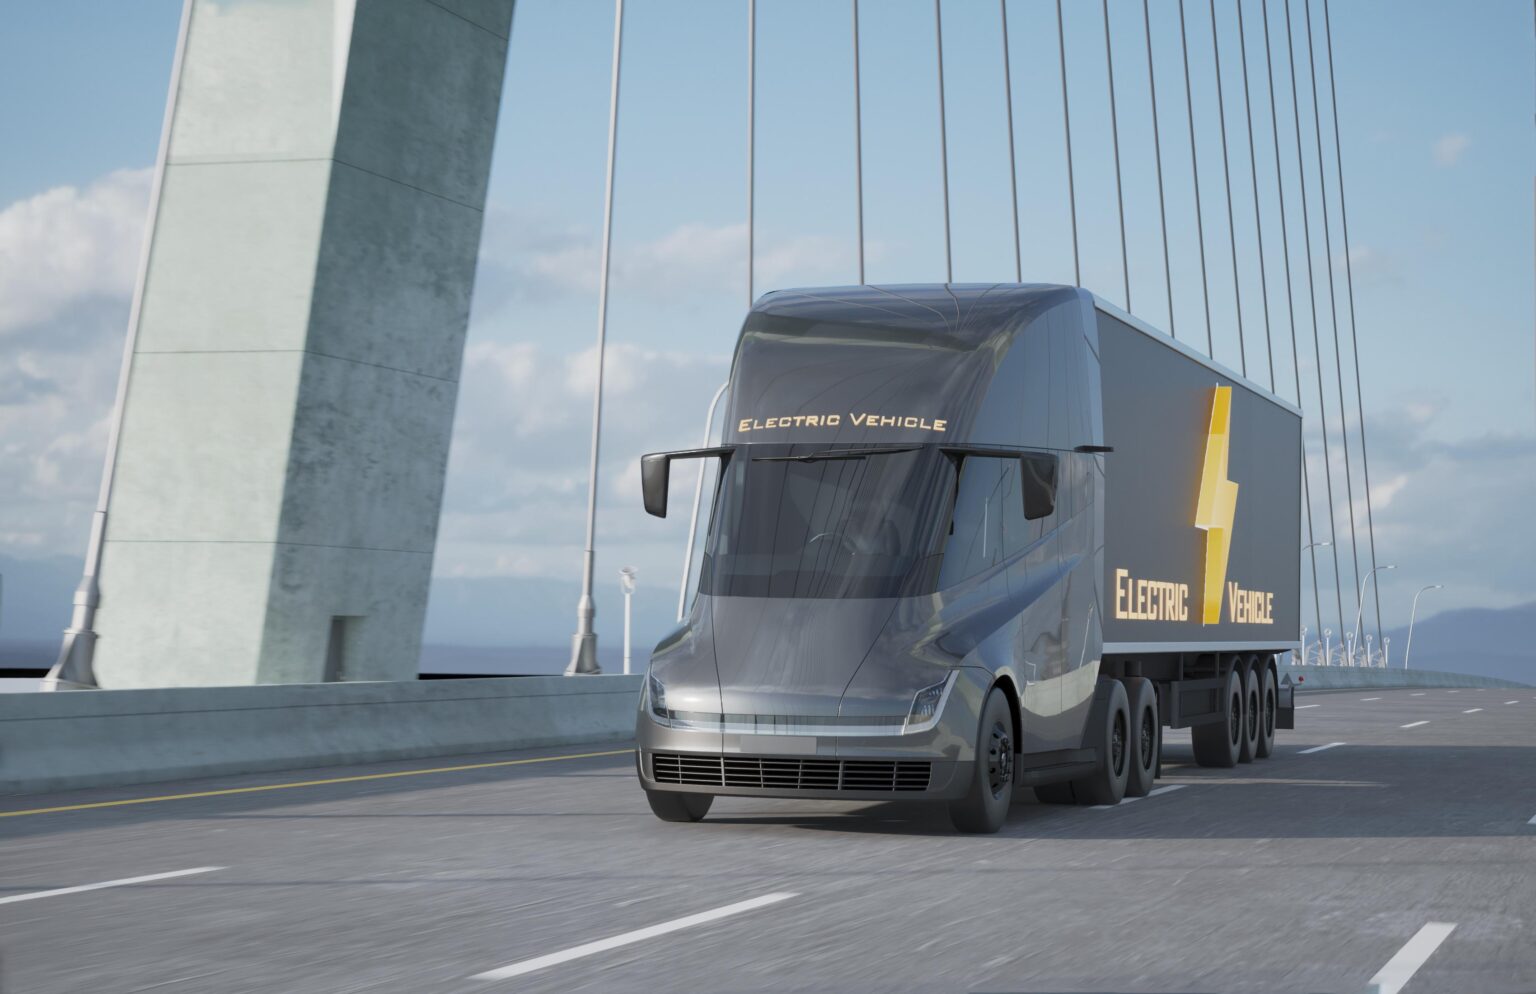 Self-Driving Semis: The Future of the Trucking Industry